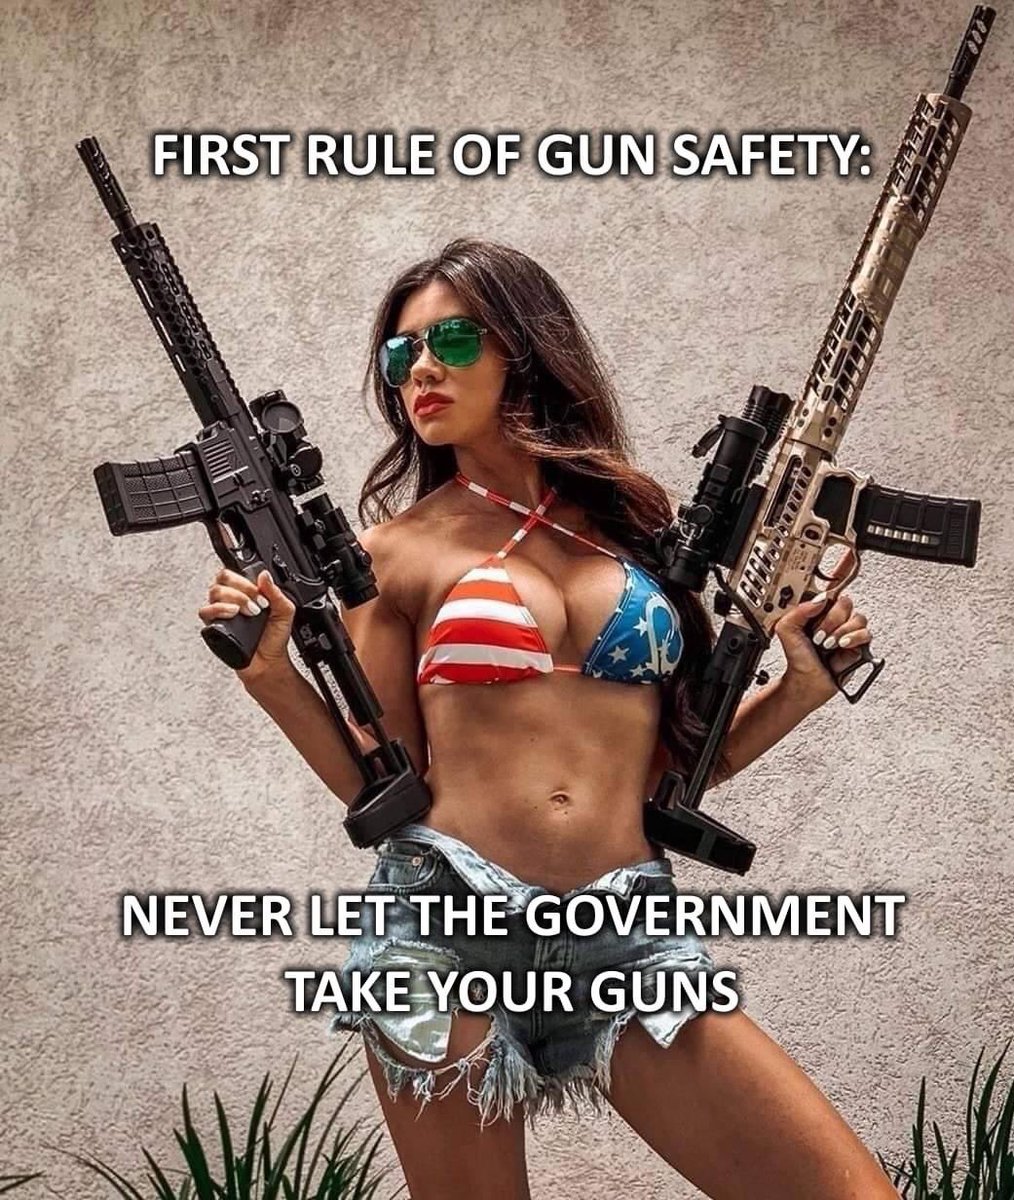 Our 2nd Amendment is vital for the preservation of our Country’s Constitution, Rights and Freedoms. @Ilegvm ⚔️🌹⚔️ @Scobra642 ⚓️ @GailS5z @GwynninPA @th1_thr1 @Napa_Patriot @Bert7058 @RogerJStoneJr @Astud987 @MChinchopper @pilldrswife @Twohawksbrand @bud_cann @MtnMama406…